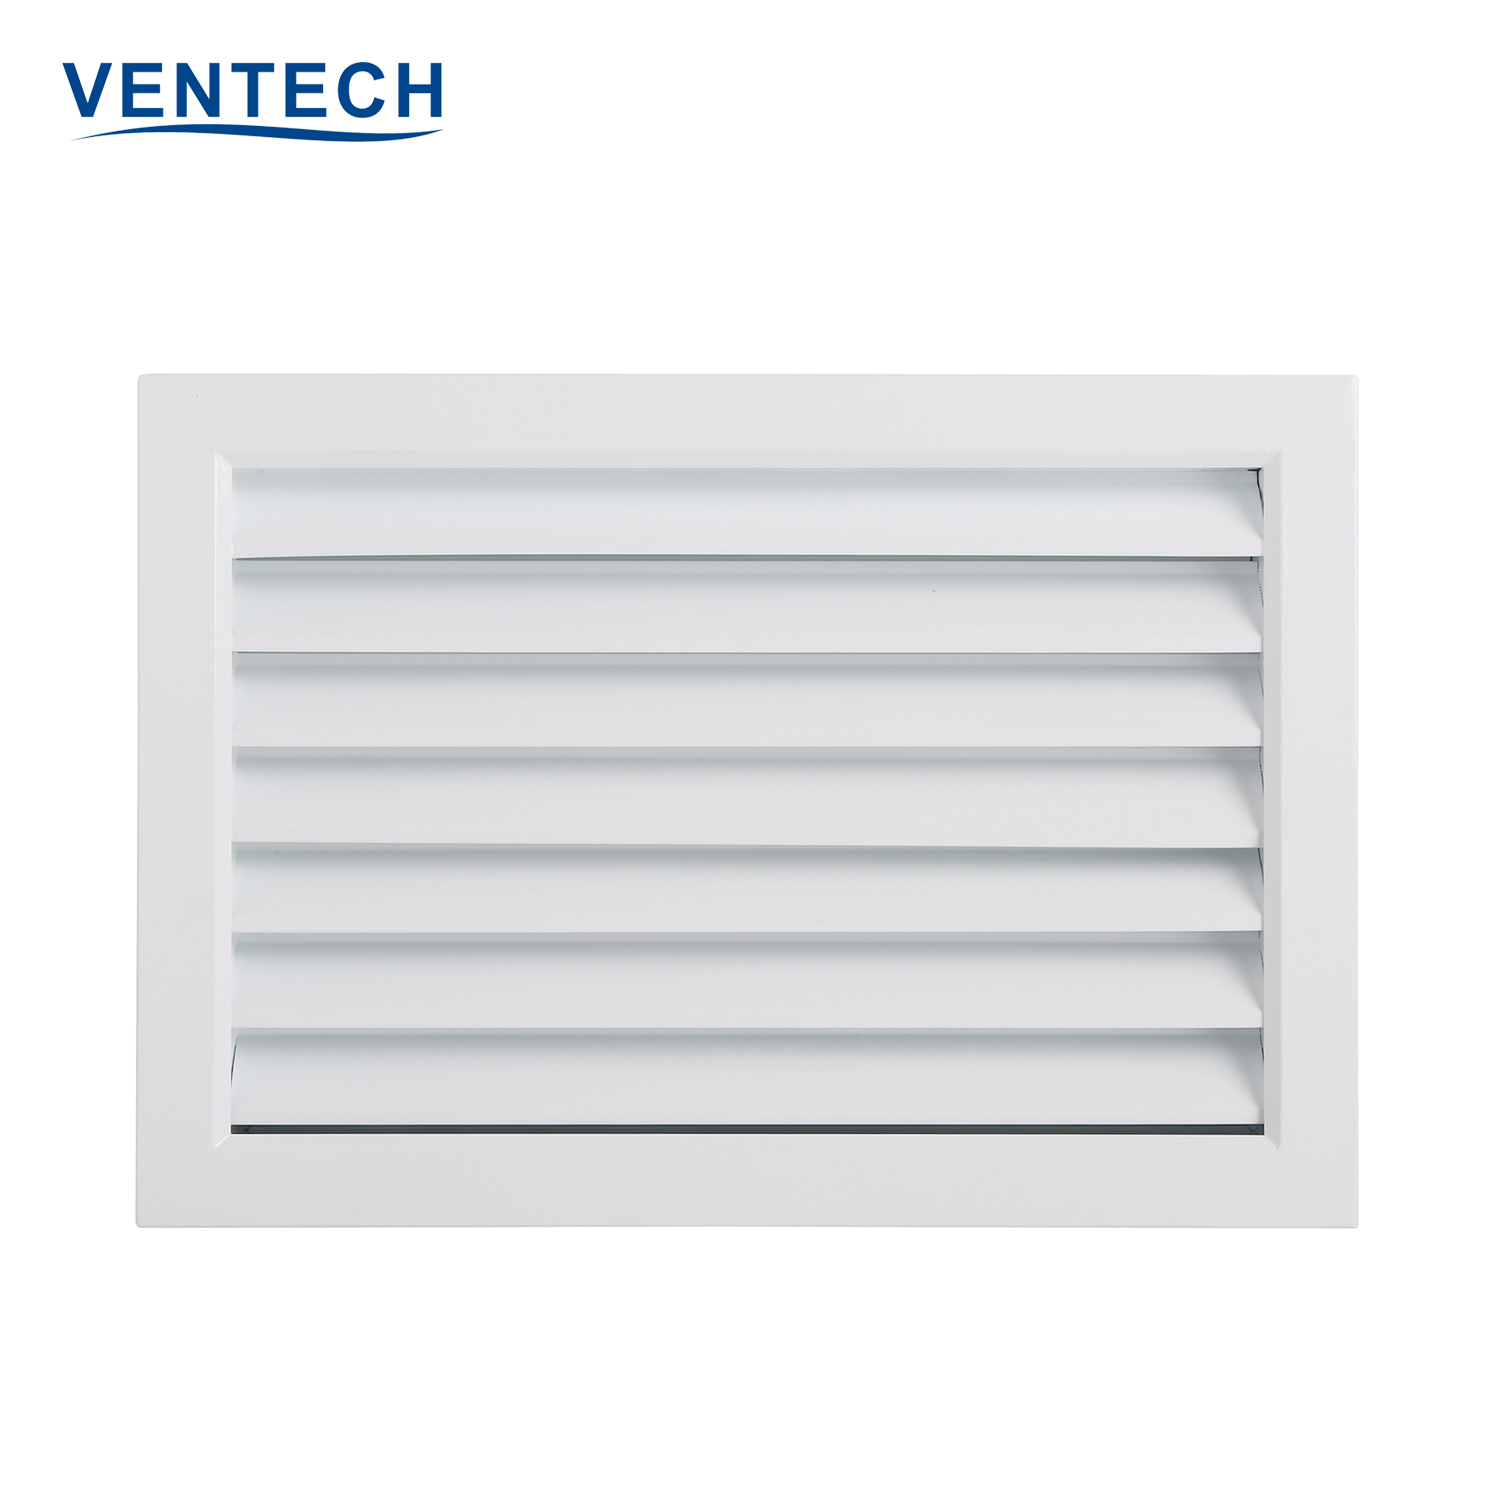 Ventech high-quality hvac air intake grille supplier for large public areas-2